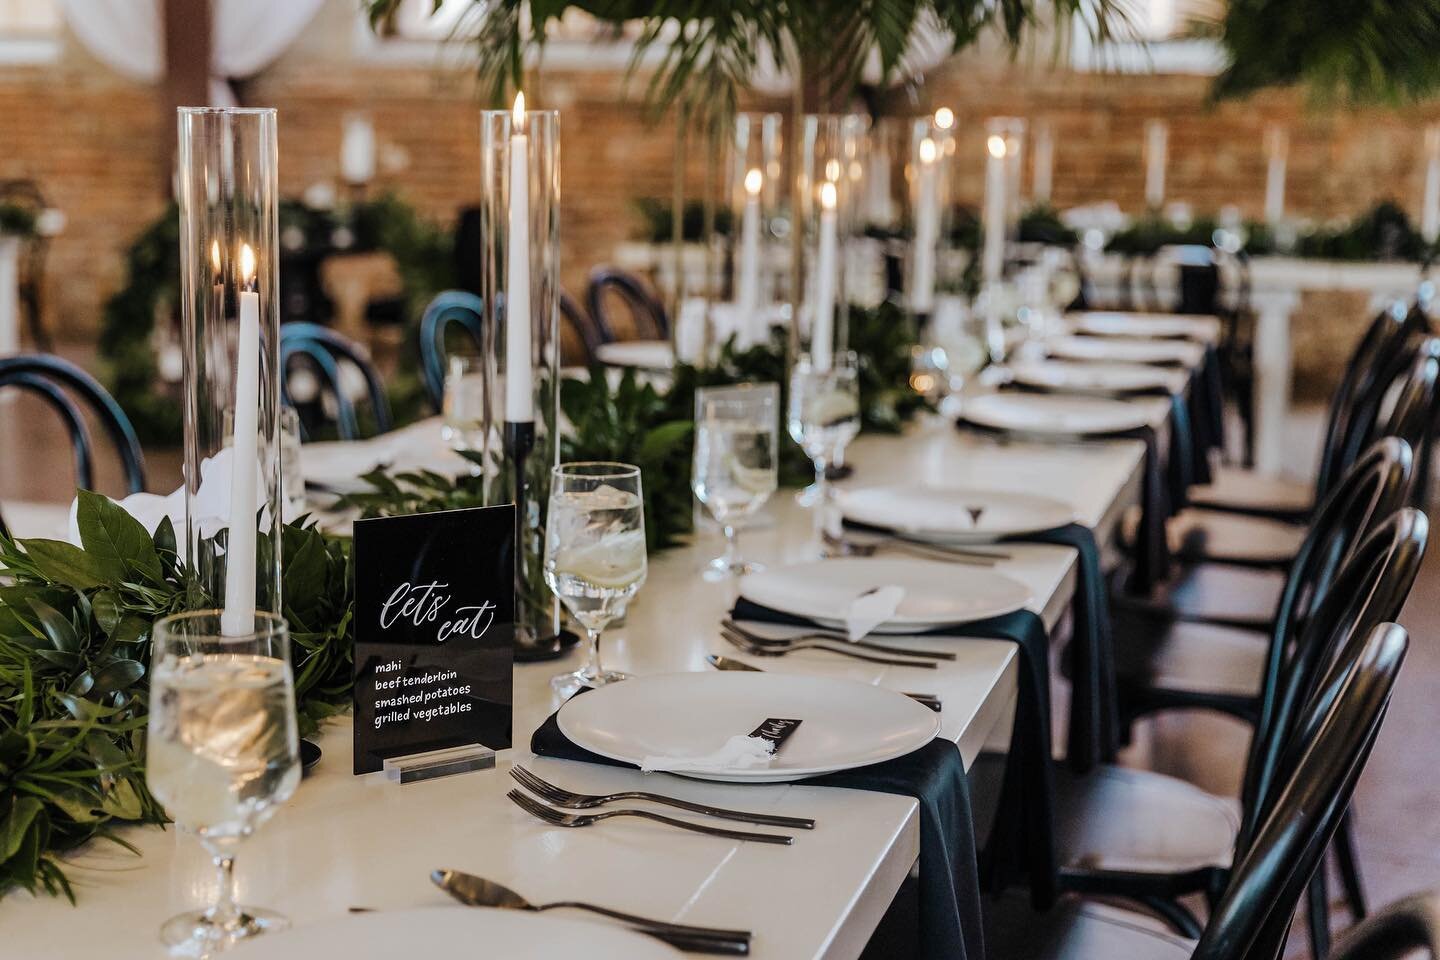 it&rsquo;s all in the details ✨

Signage + Calligraphy: @taperedink 
Photography: @lightbloomphoto
Arbor rental: @dpetc 
Planning: @socialbflyevents 
Venue: @brooklynartscenter 
Hair + Makeup: @reignbeautync 
Videography: @jcorderovisuals 
Catering: 